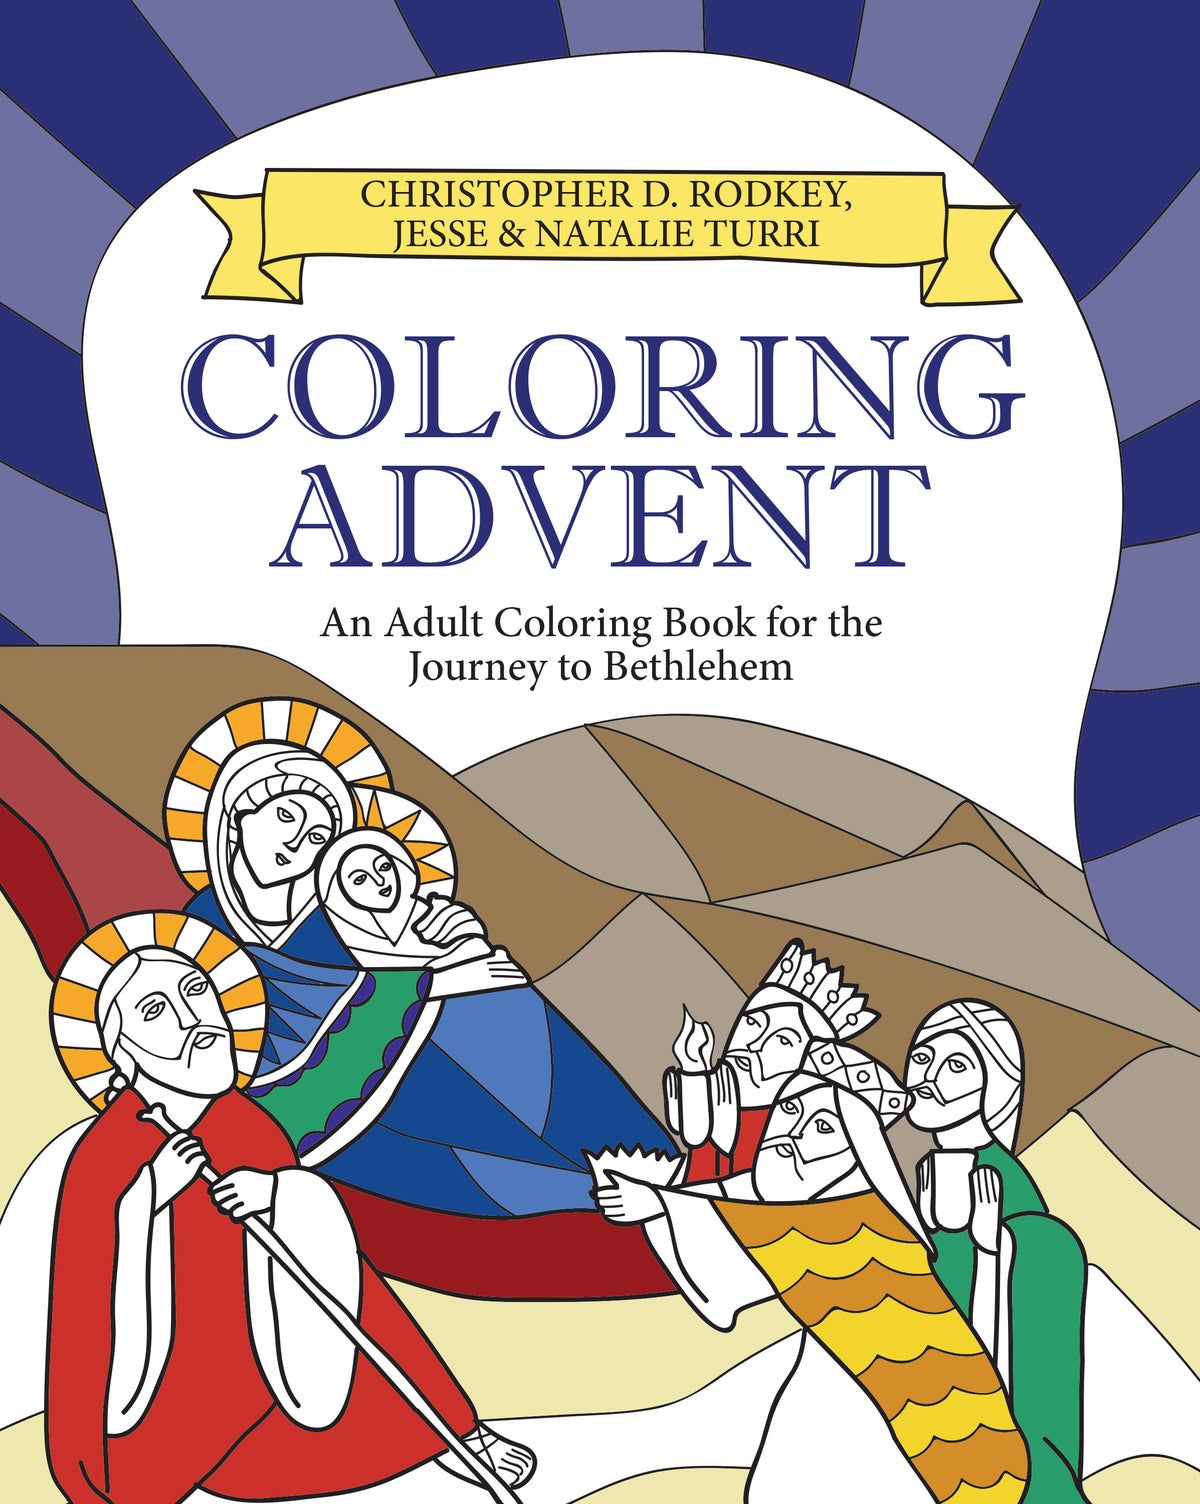 Kit Davenport: The Adult Coloring Book 